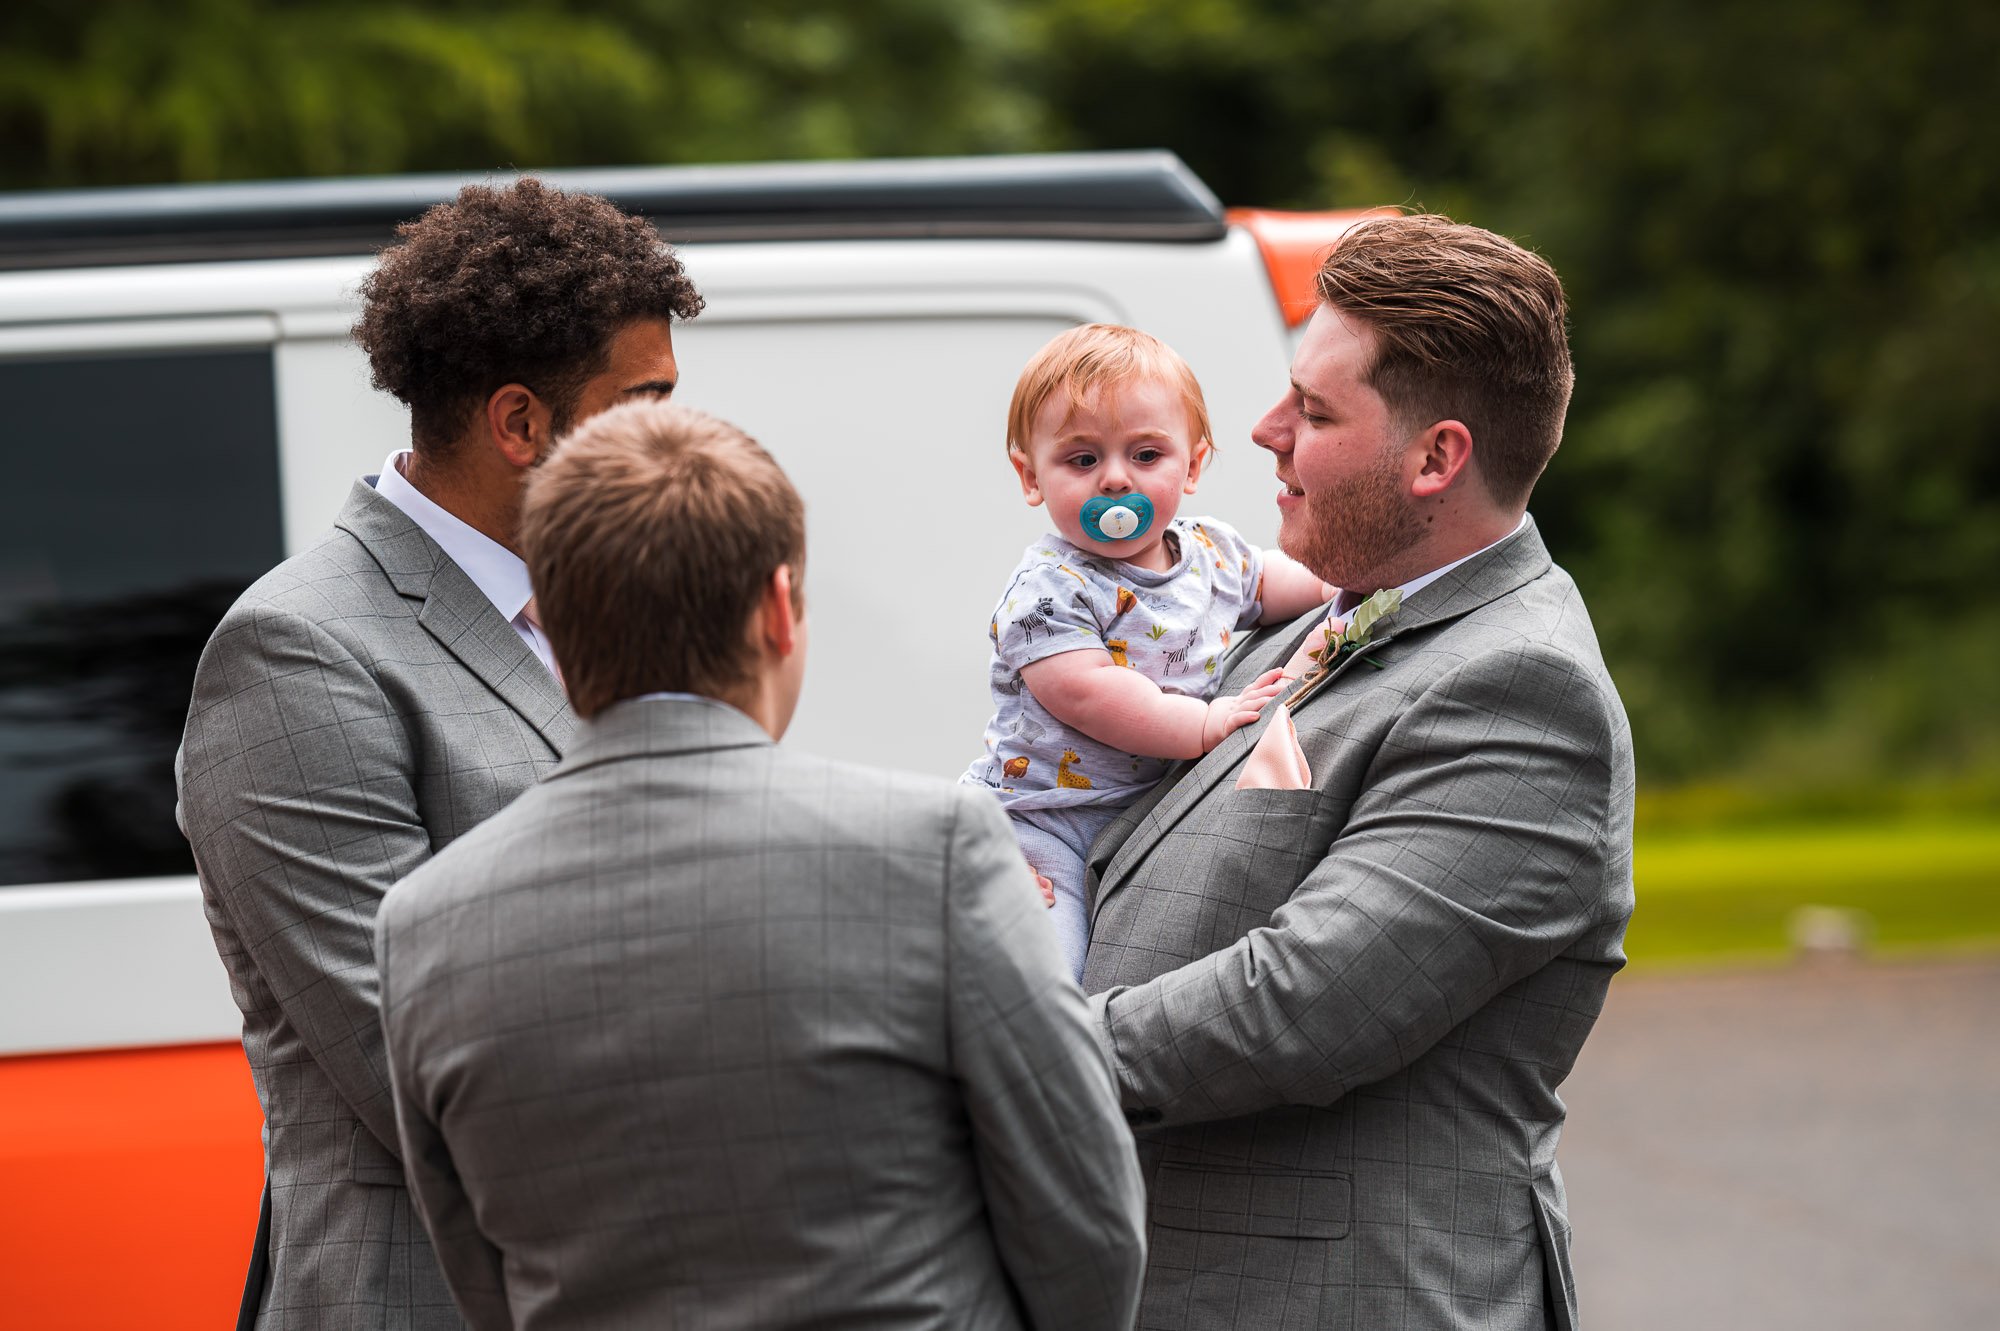 Groomsmen with the groom's baby son